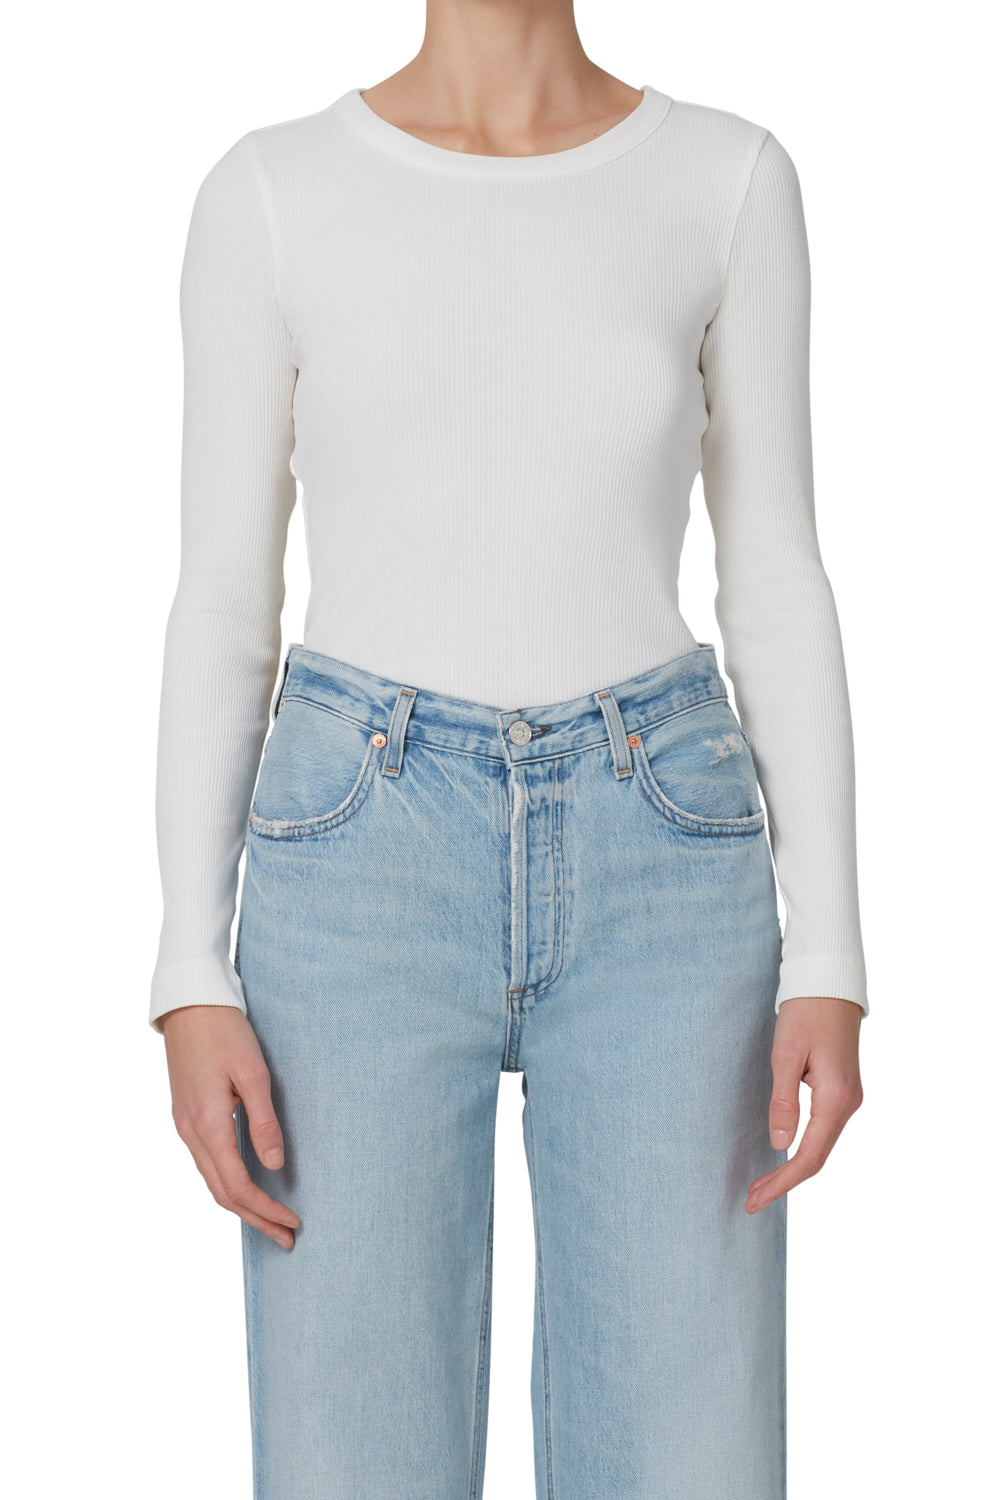 Citizens of Humanity - Adeline Top in Soft White